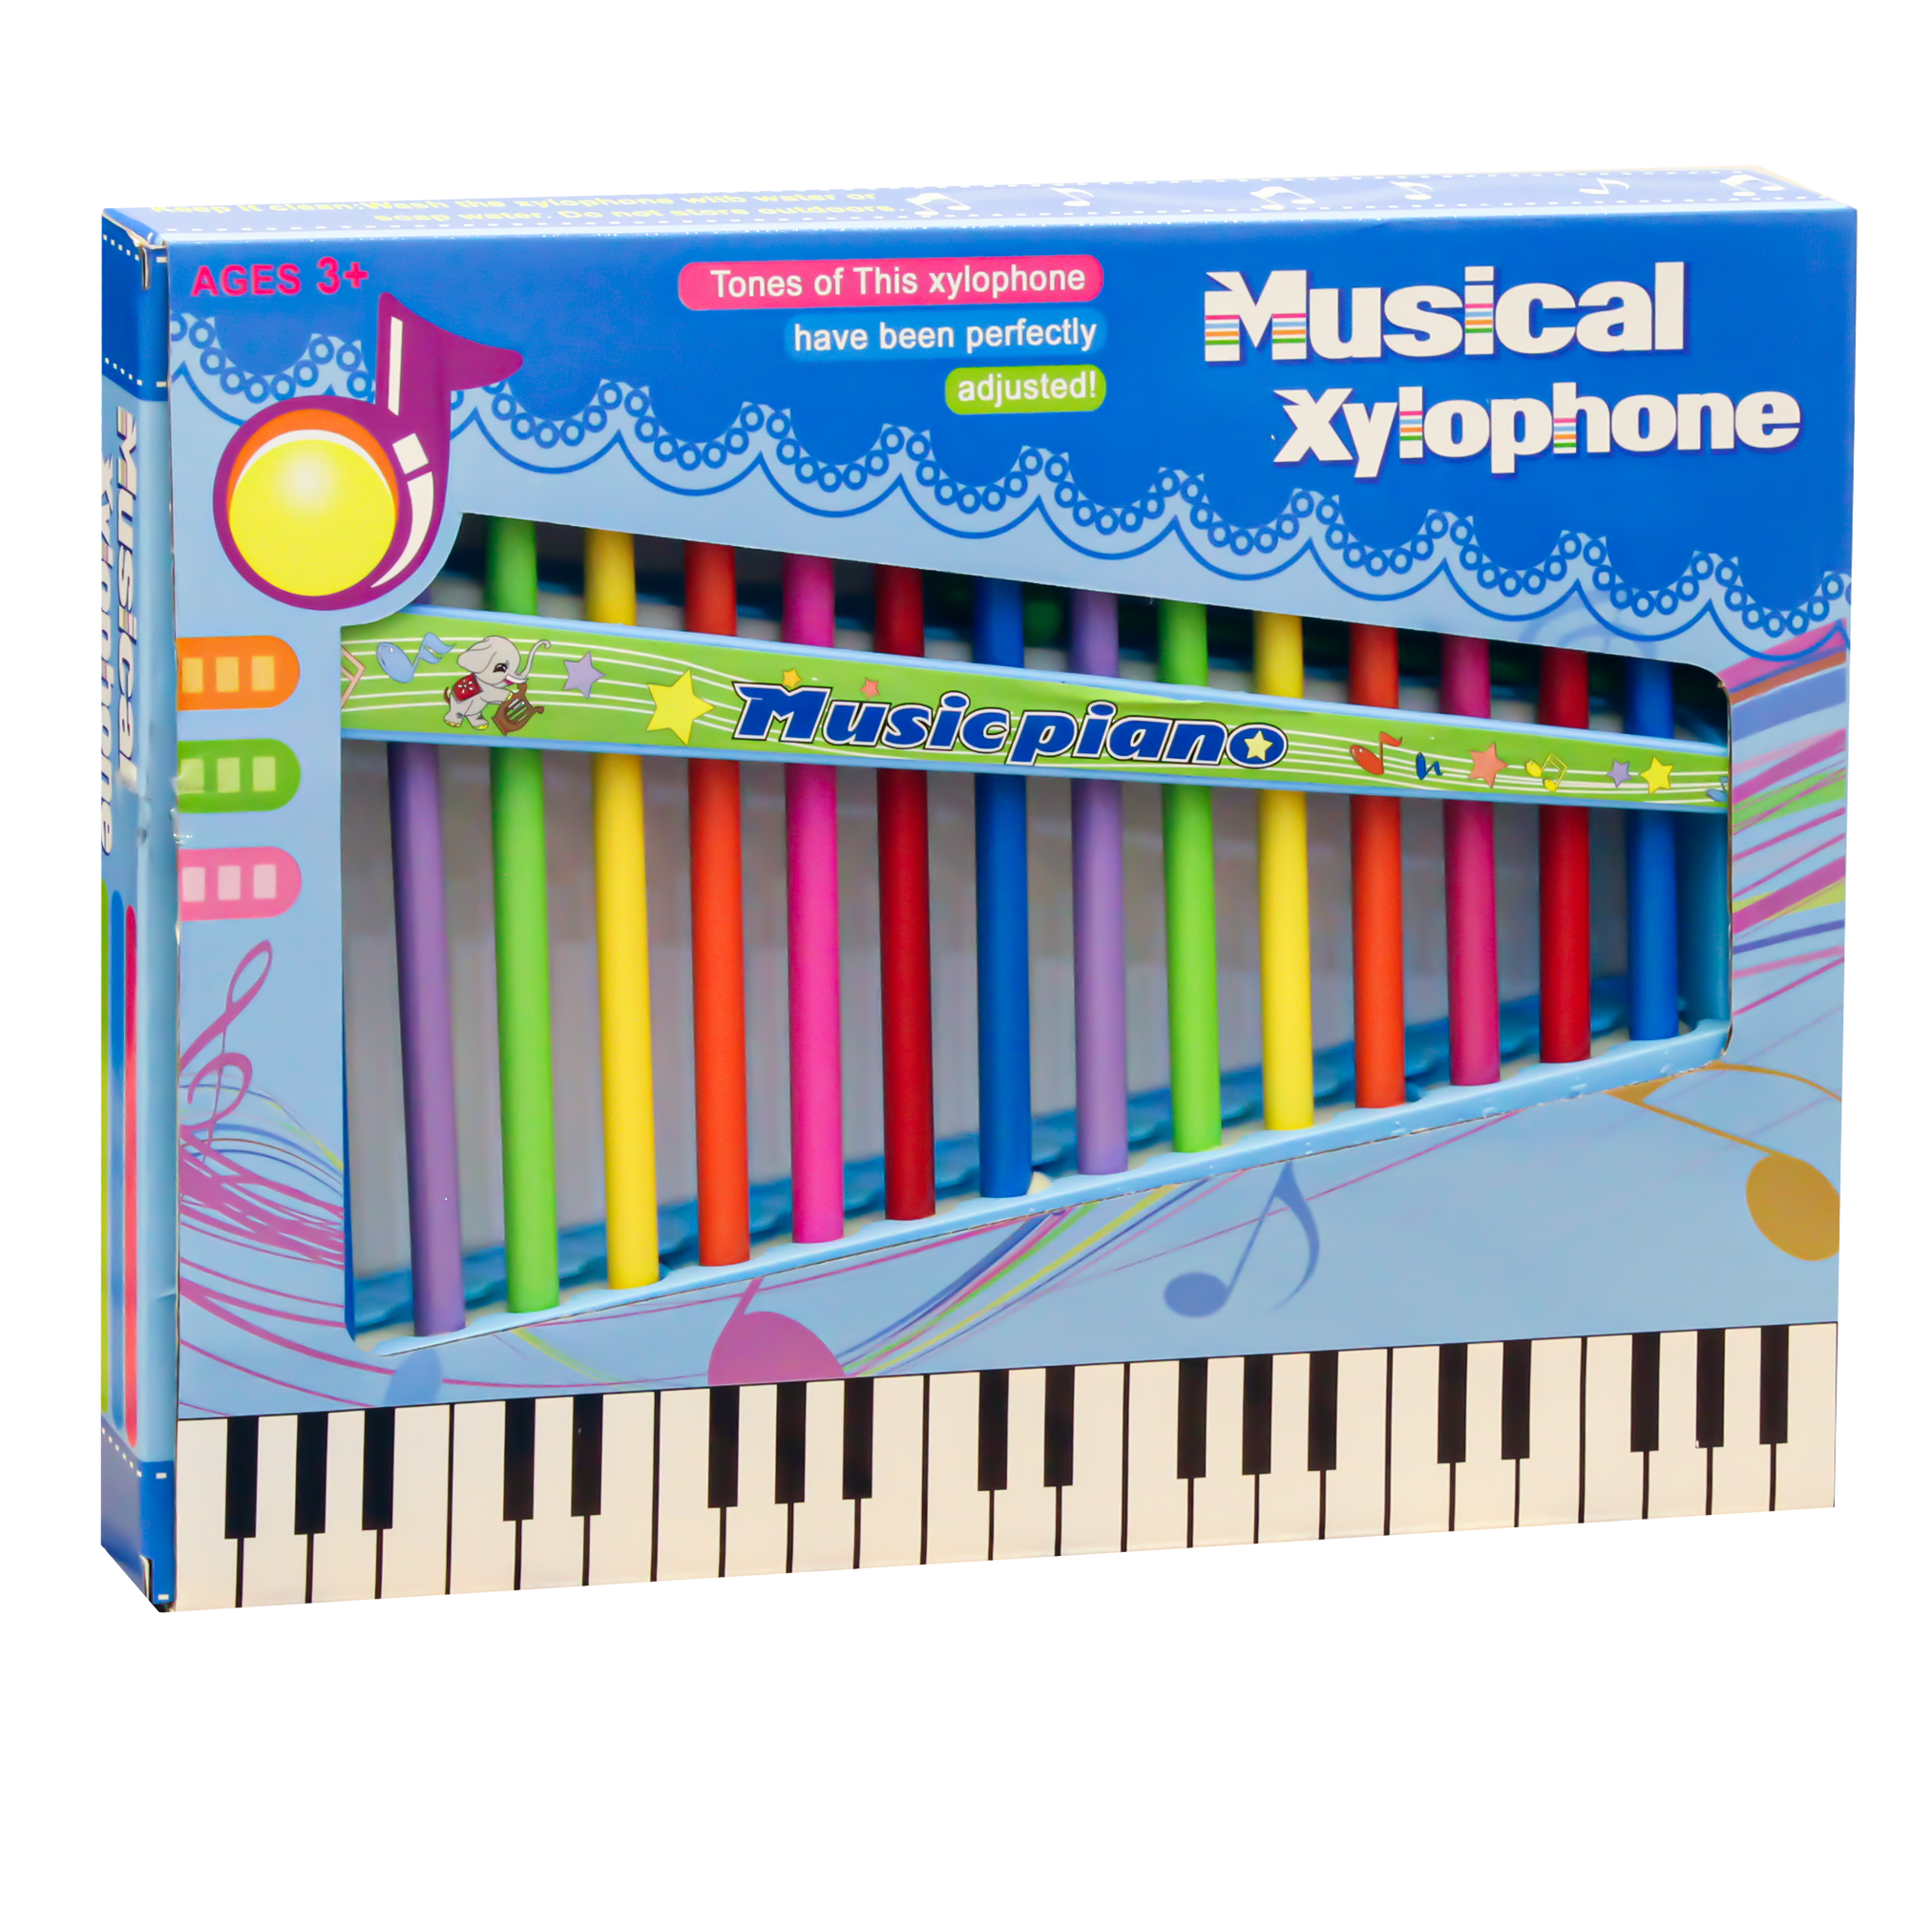 Plastic Educational Musical Xylophone With Crisp Pleasing And Clear Sound For Kids - Multi Color Large  Size